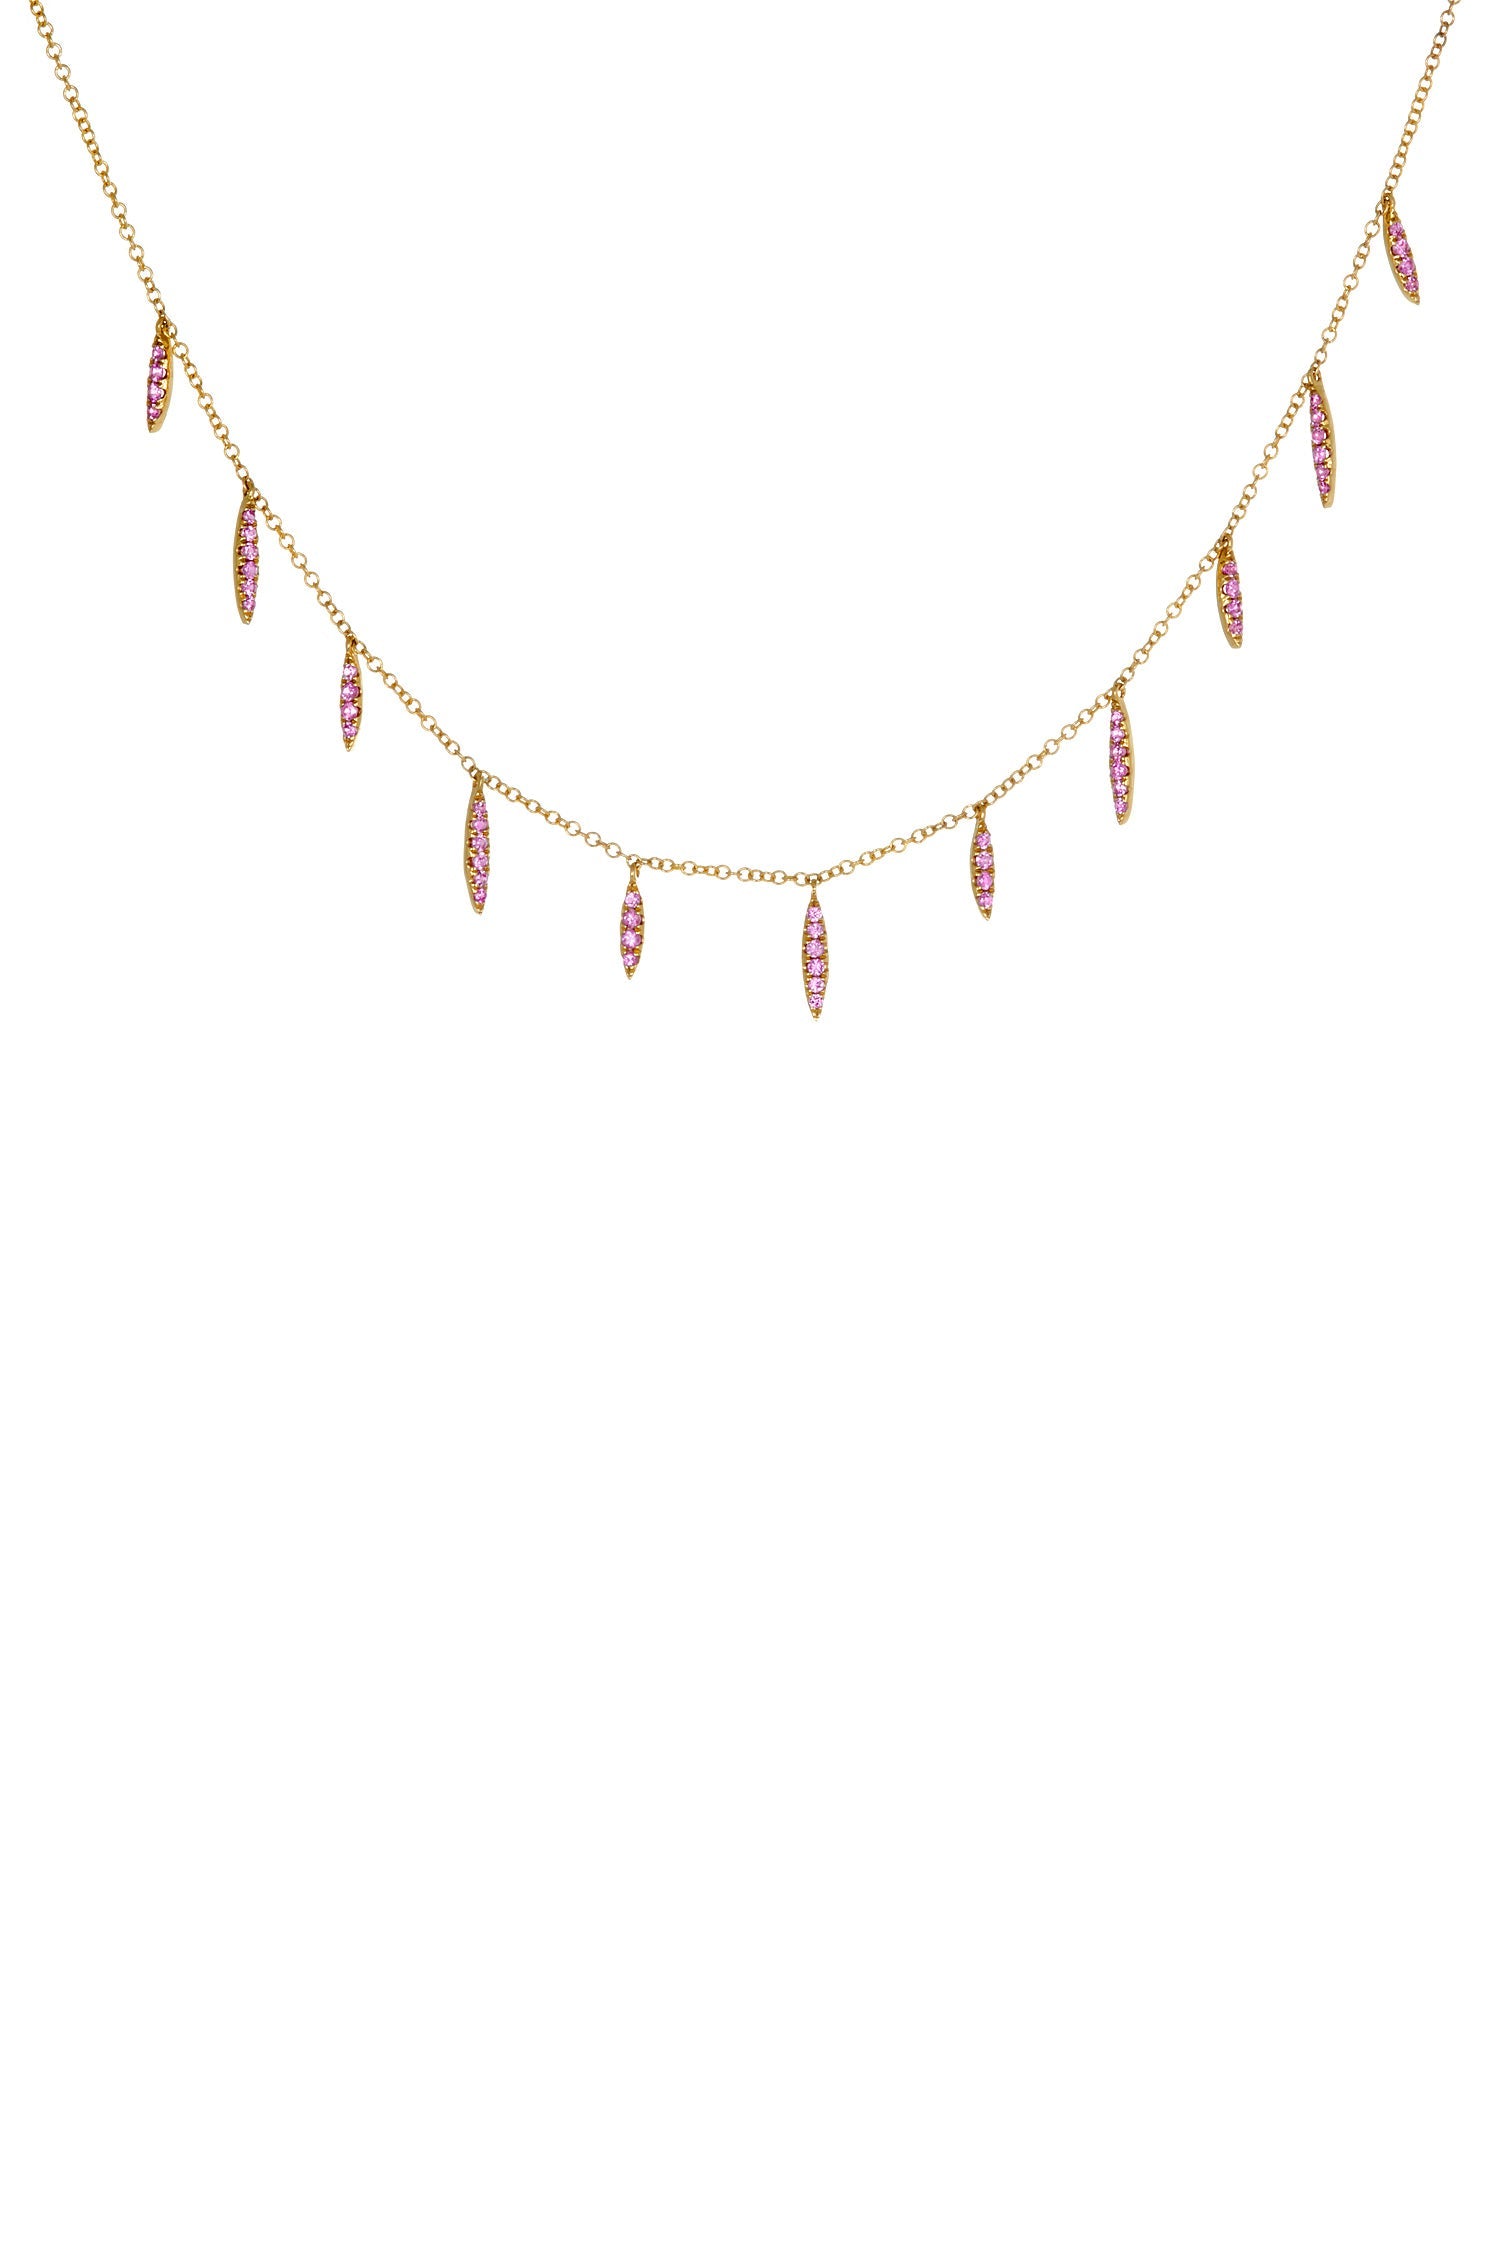 DEVON WOODHILL-Deluxe Eleven Wishes Pink Sapphire Necklace-YELLOW GOLD